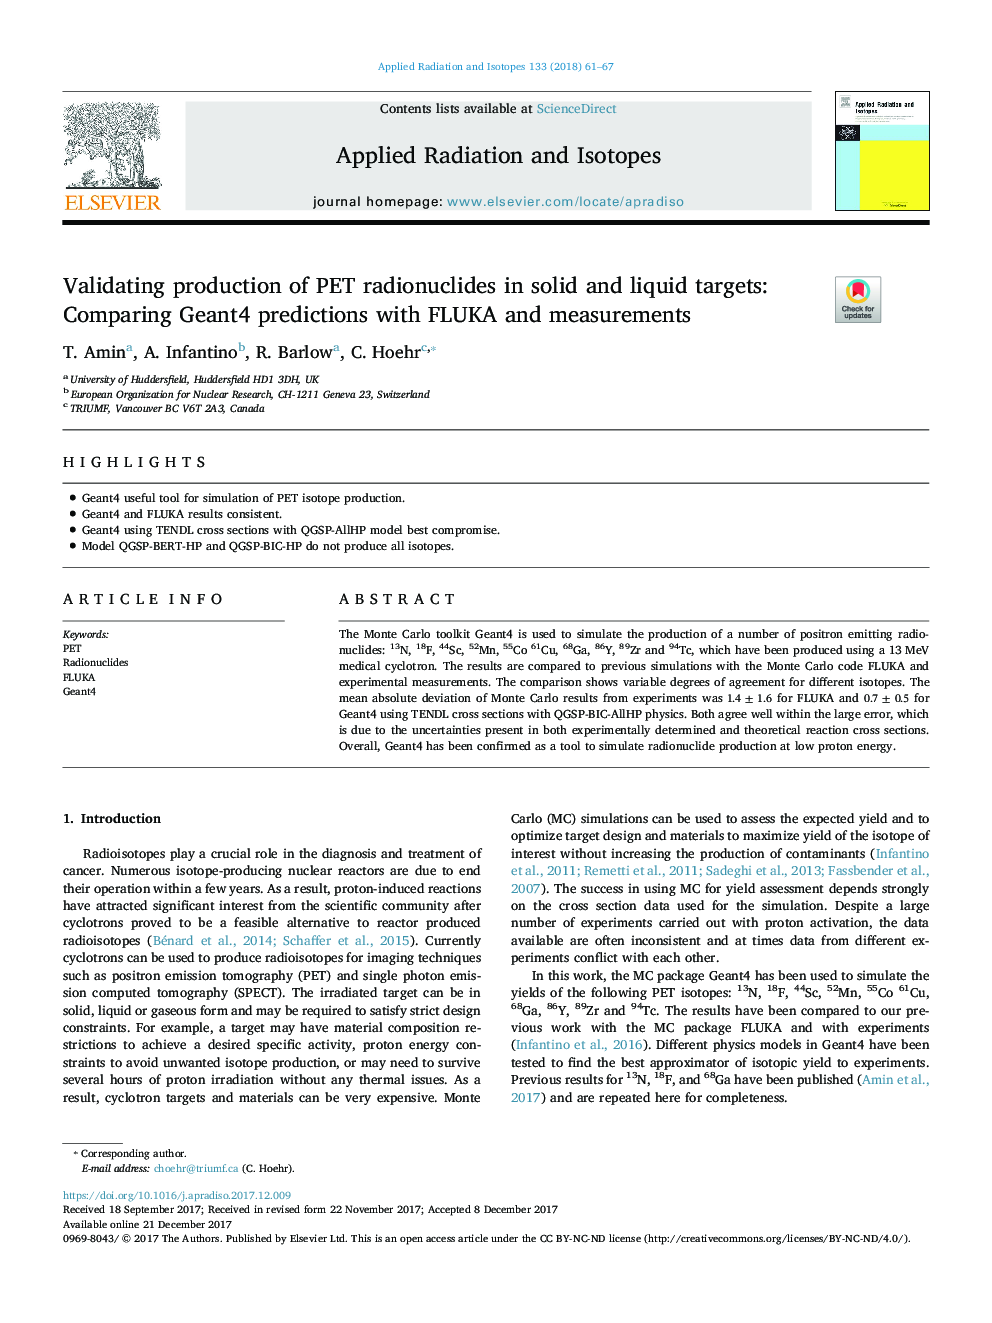 Validating production of PET radionuclides in solid and liquid targets: Comparing Geant4 predictions with FLUKA and measurements